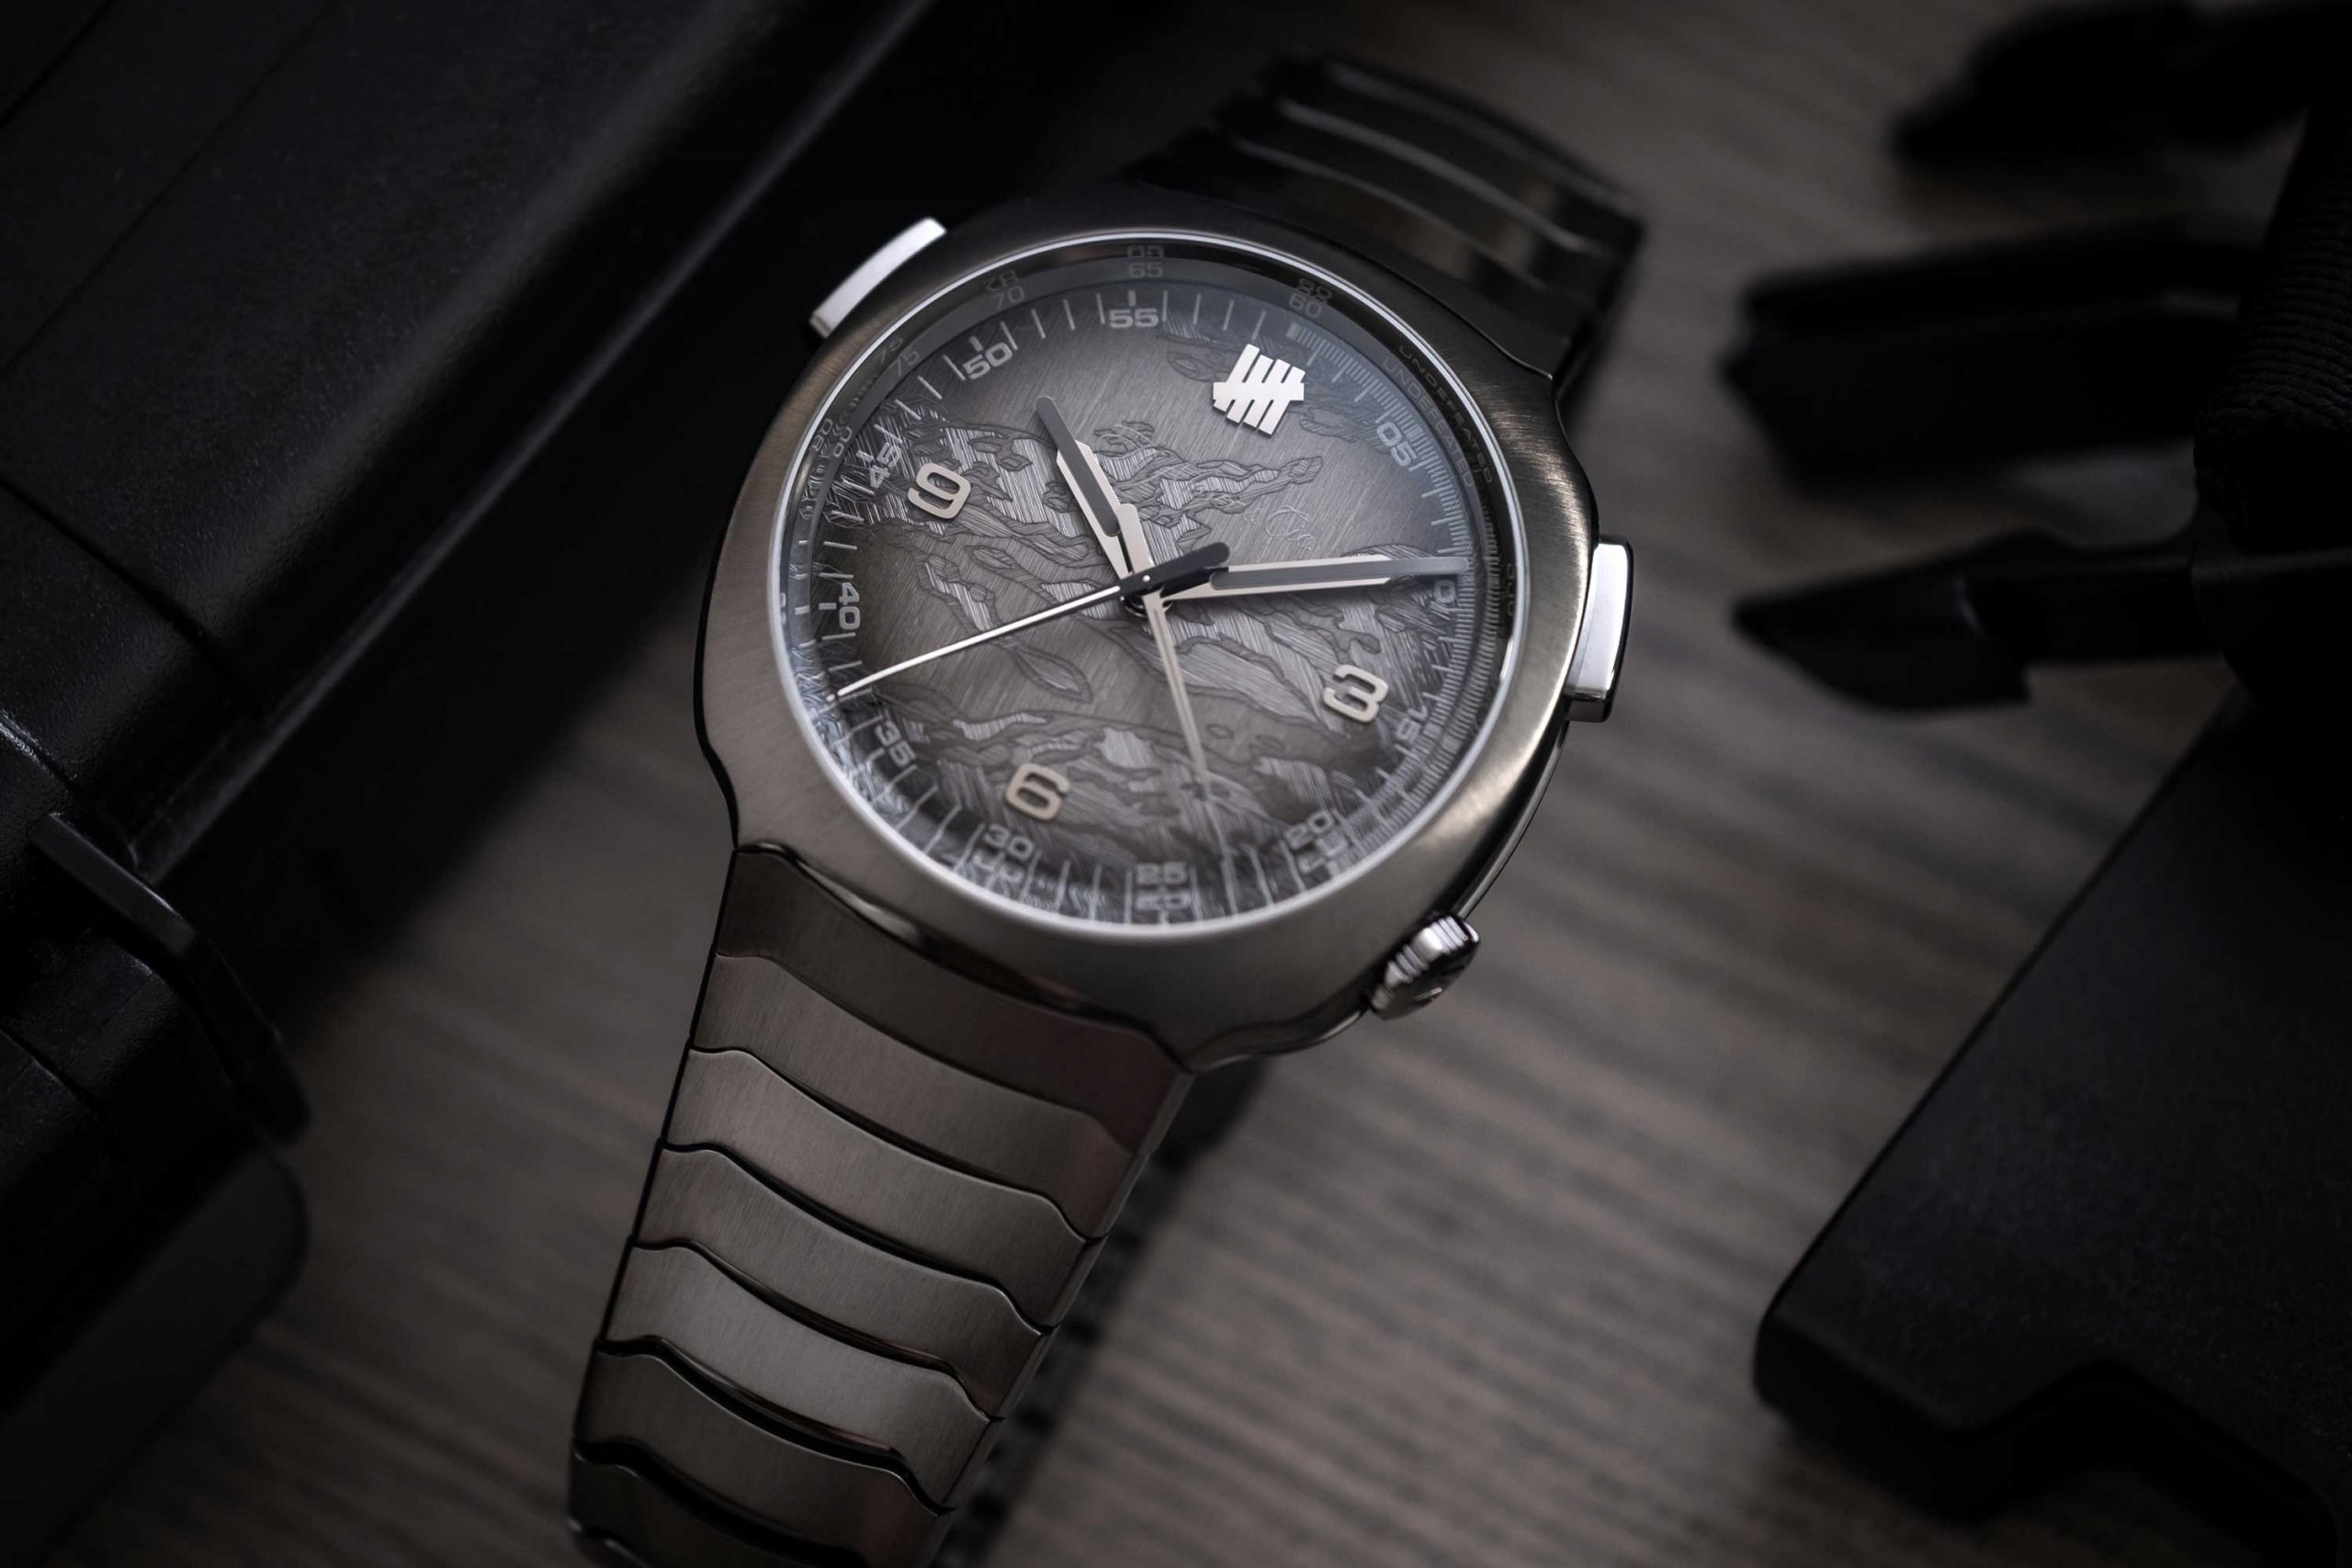 H. Moser & Cie. Streamliner Chronograph UNDEFEATED